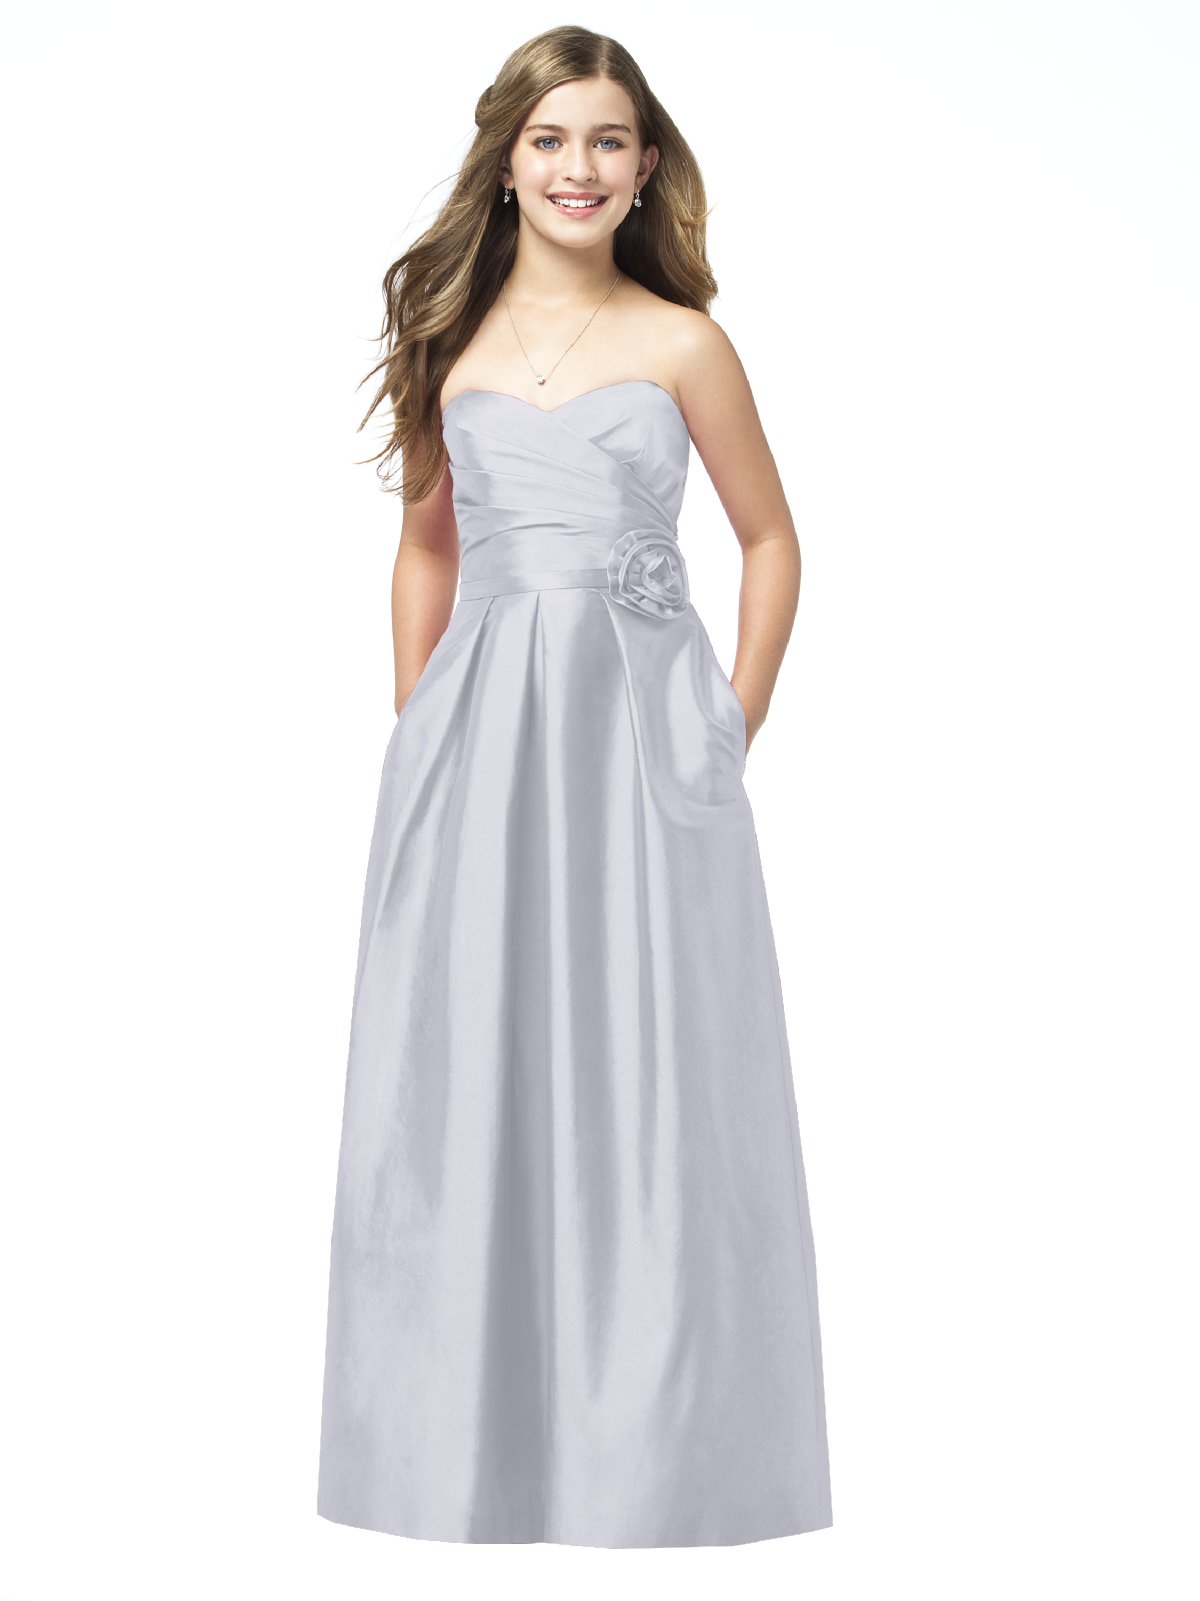 Silver A Line Strapless Sweetheart Zipper Floor Length Satin Prom Dresses With Flowers And Pockets 